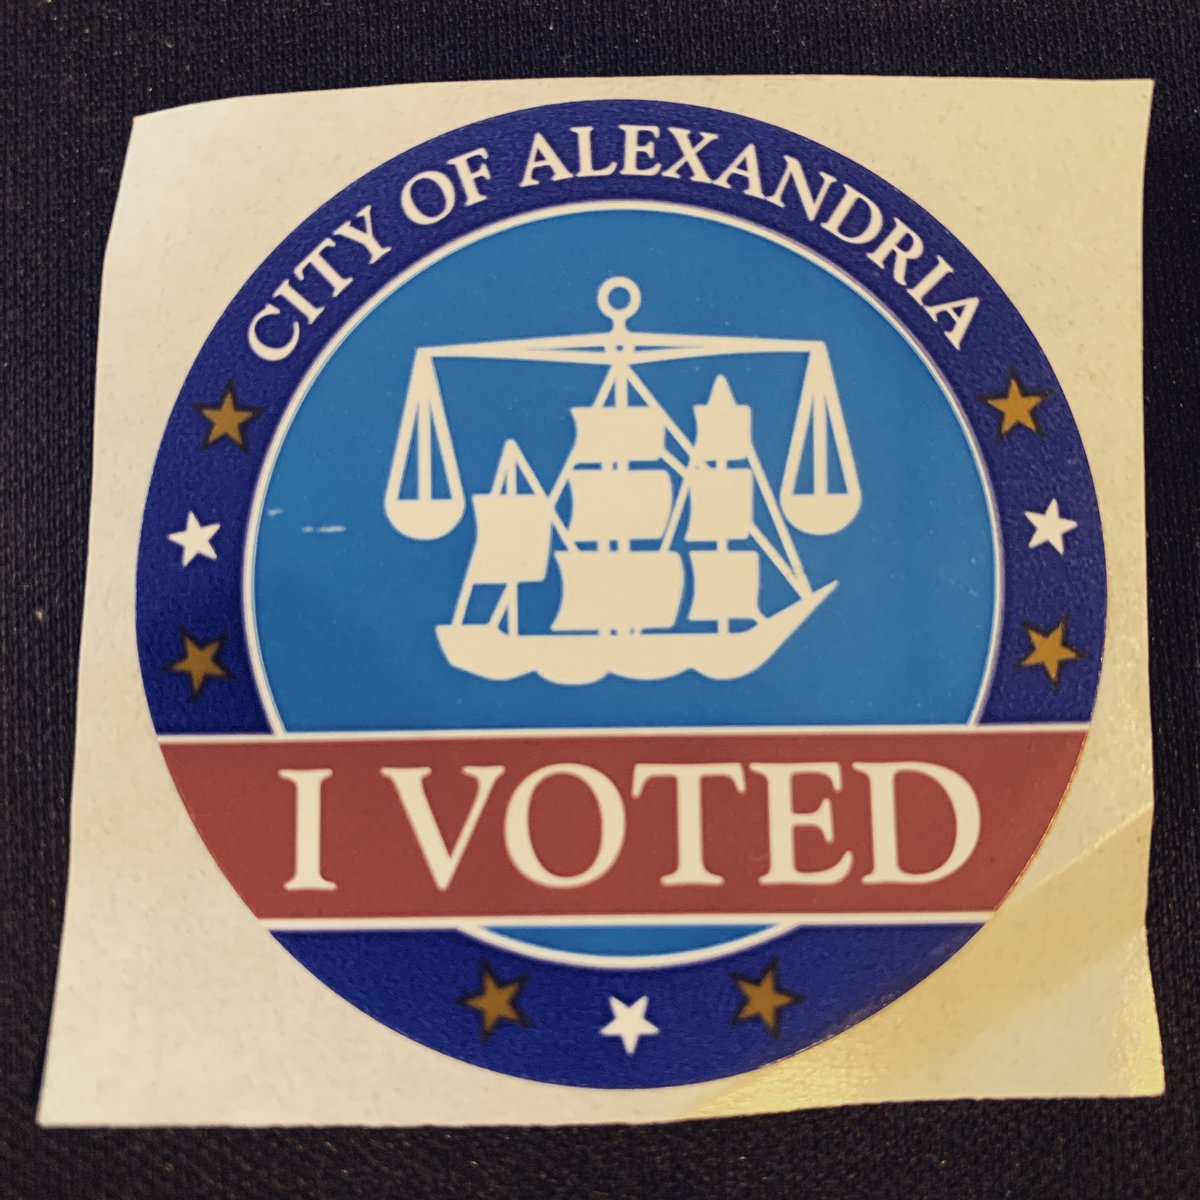 Don’t speak about it, be about it! #VoteToday #iVoted #LocalElectionsMatter #CityofAlexandria #Alexandria #CivicDuty